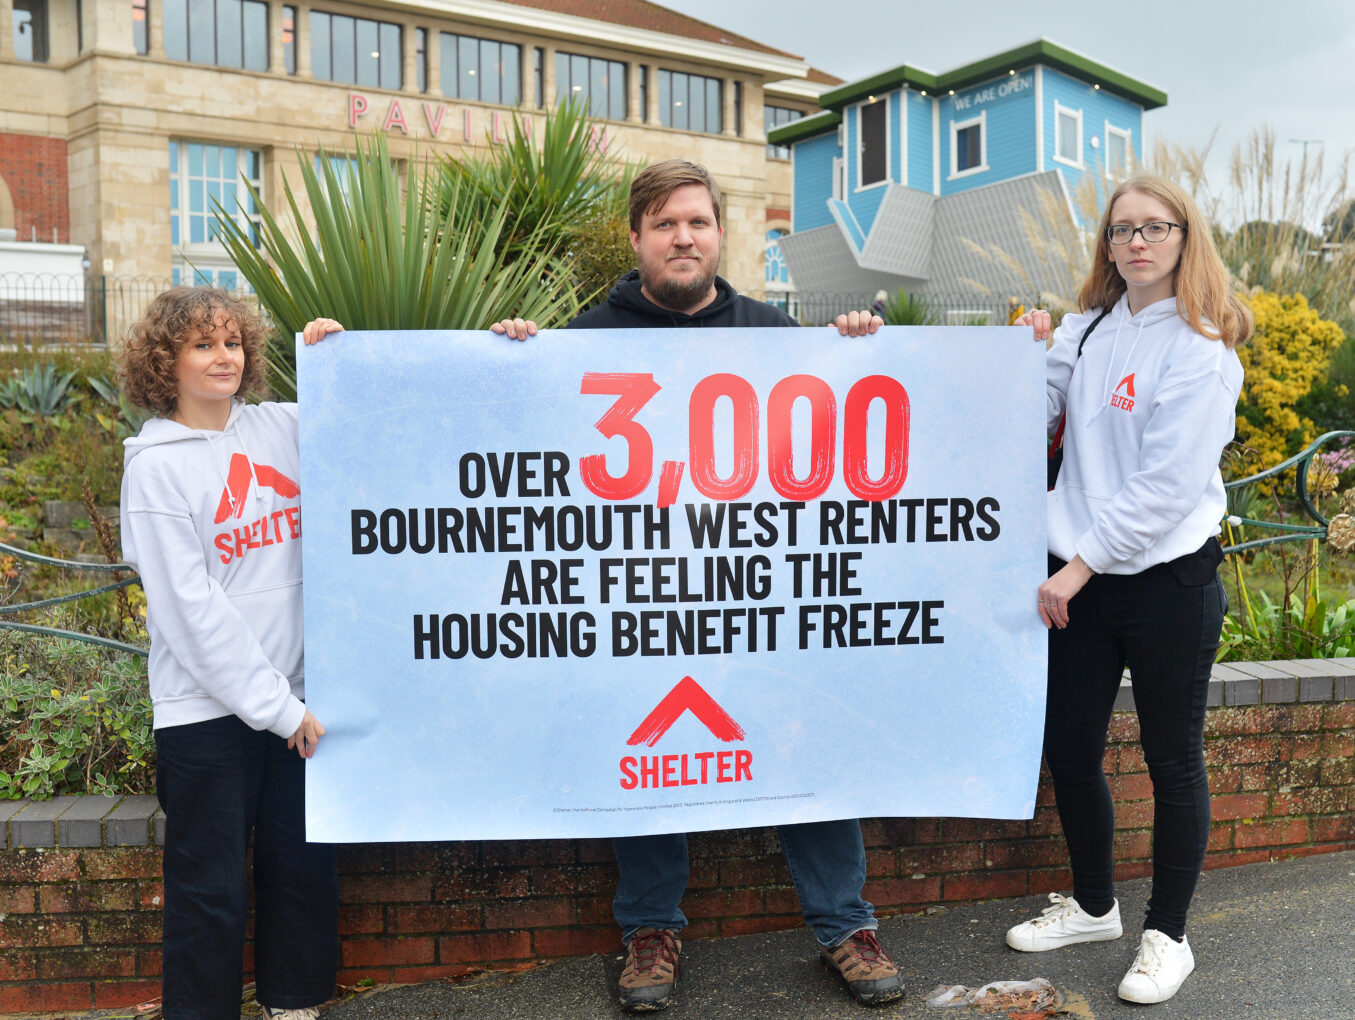 The chancellor must act: the housing benefit freeze is costing the country